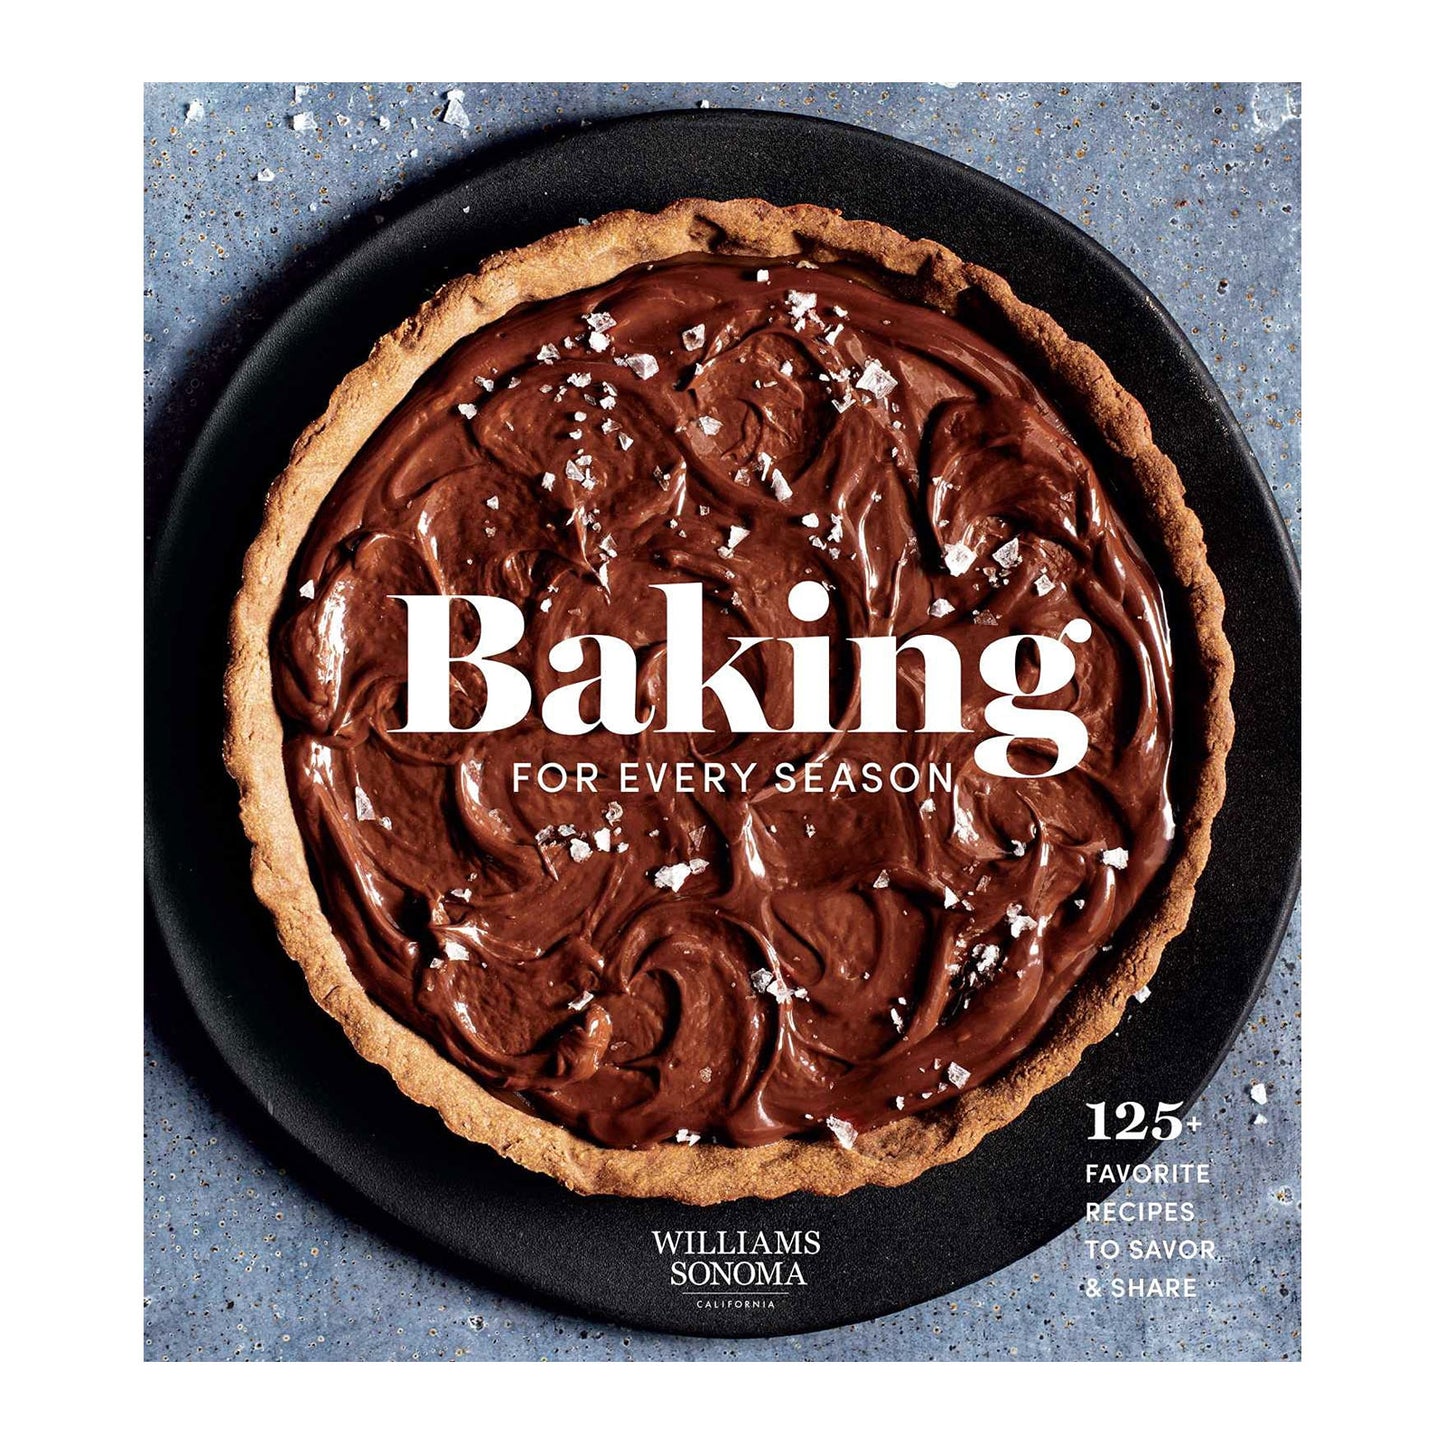 Baking for Every Season: 125+ Favorite Recipes to Savor & Share